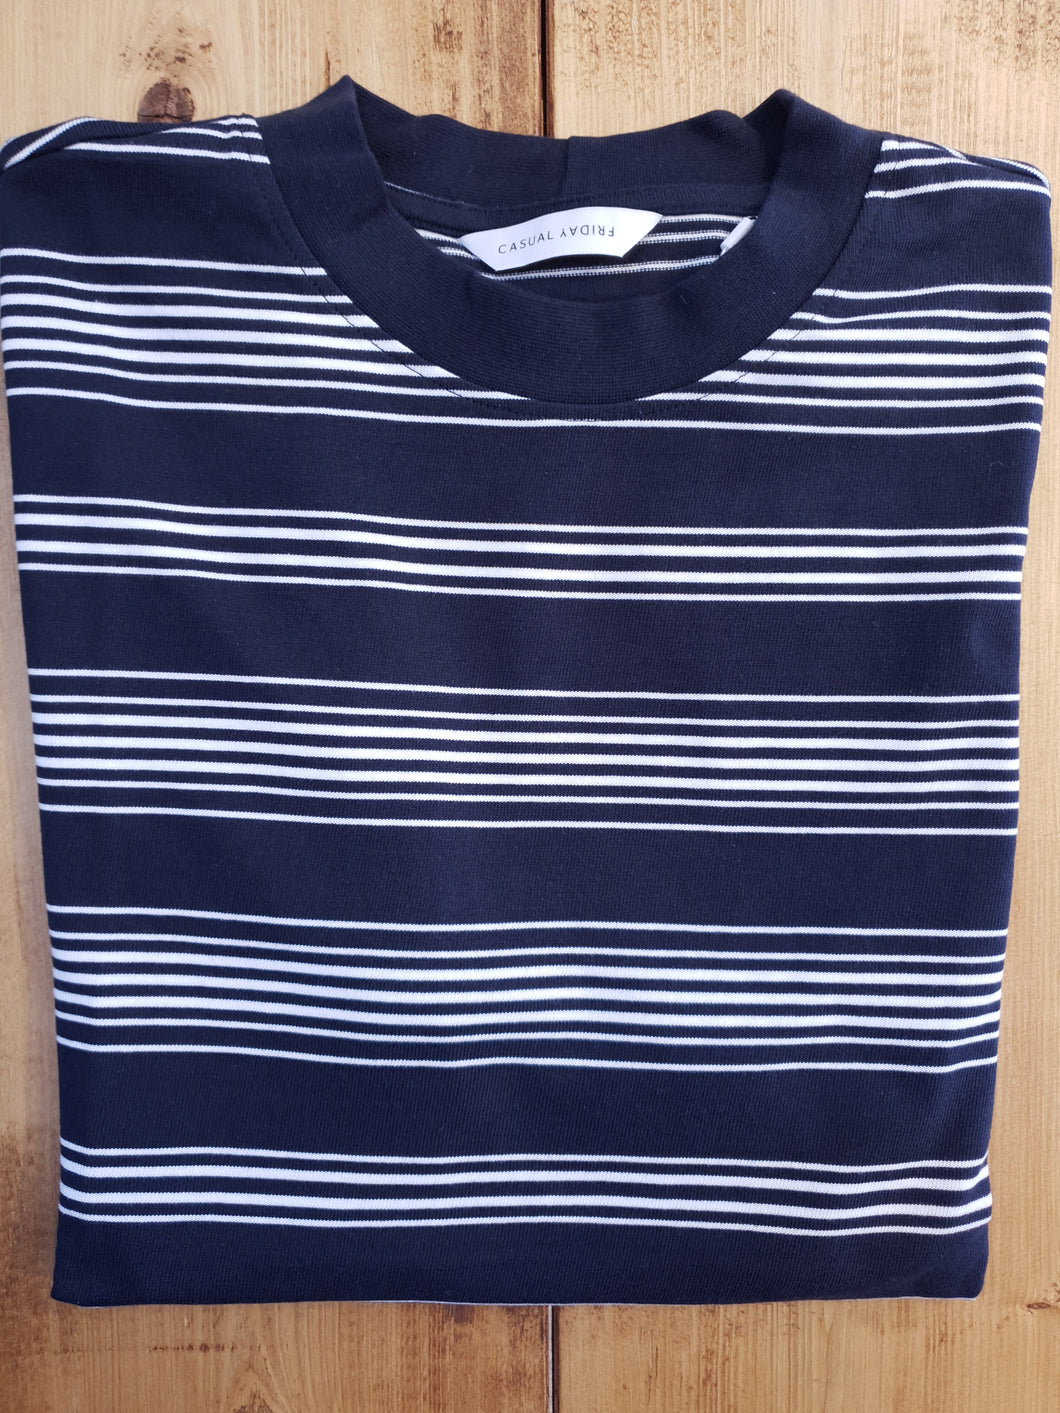 Striped Navy T-Shirt - Tue | Casual Friday